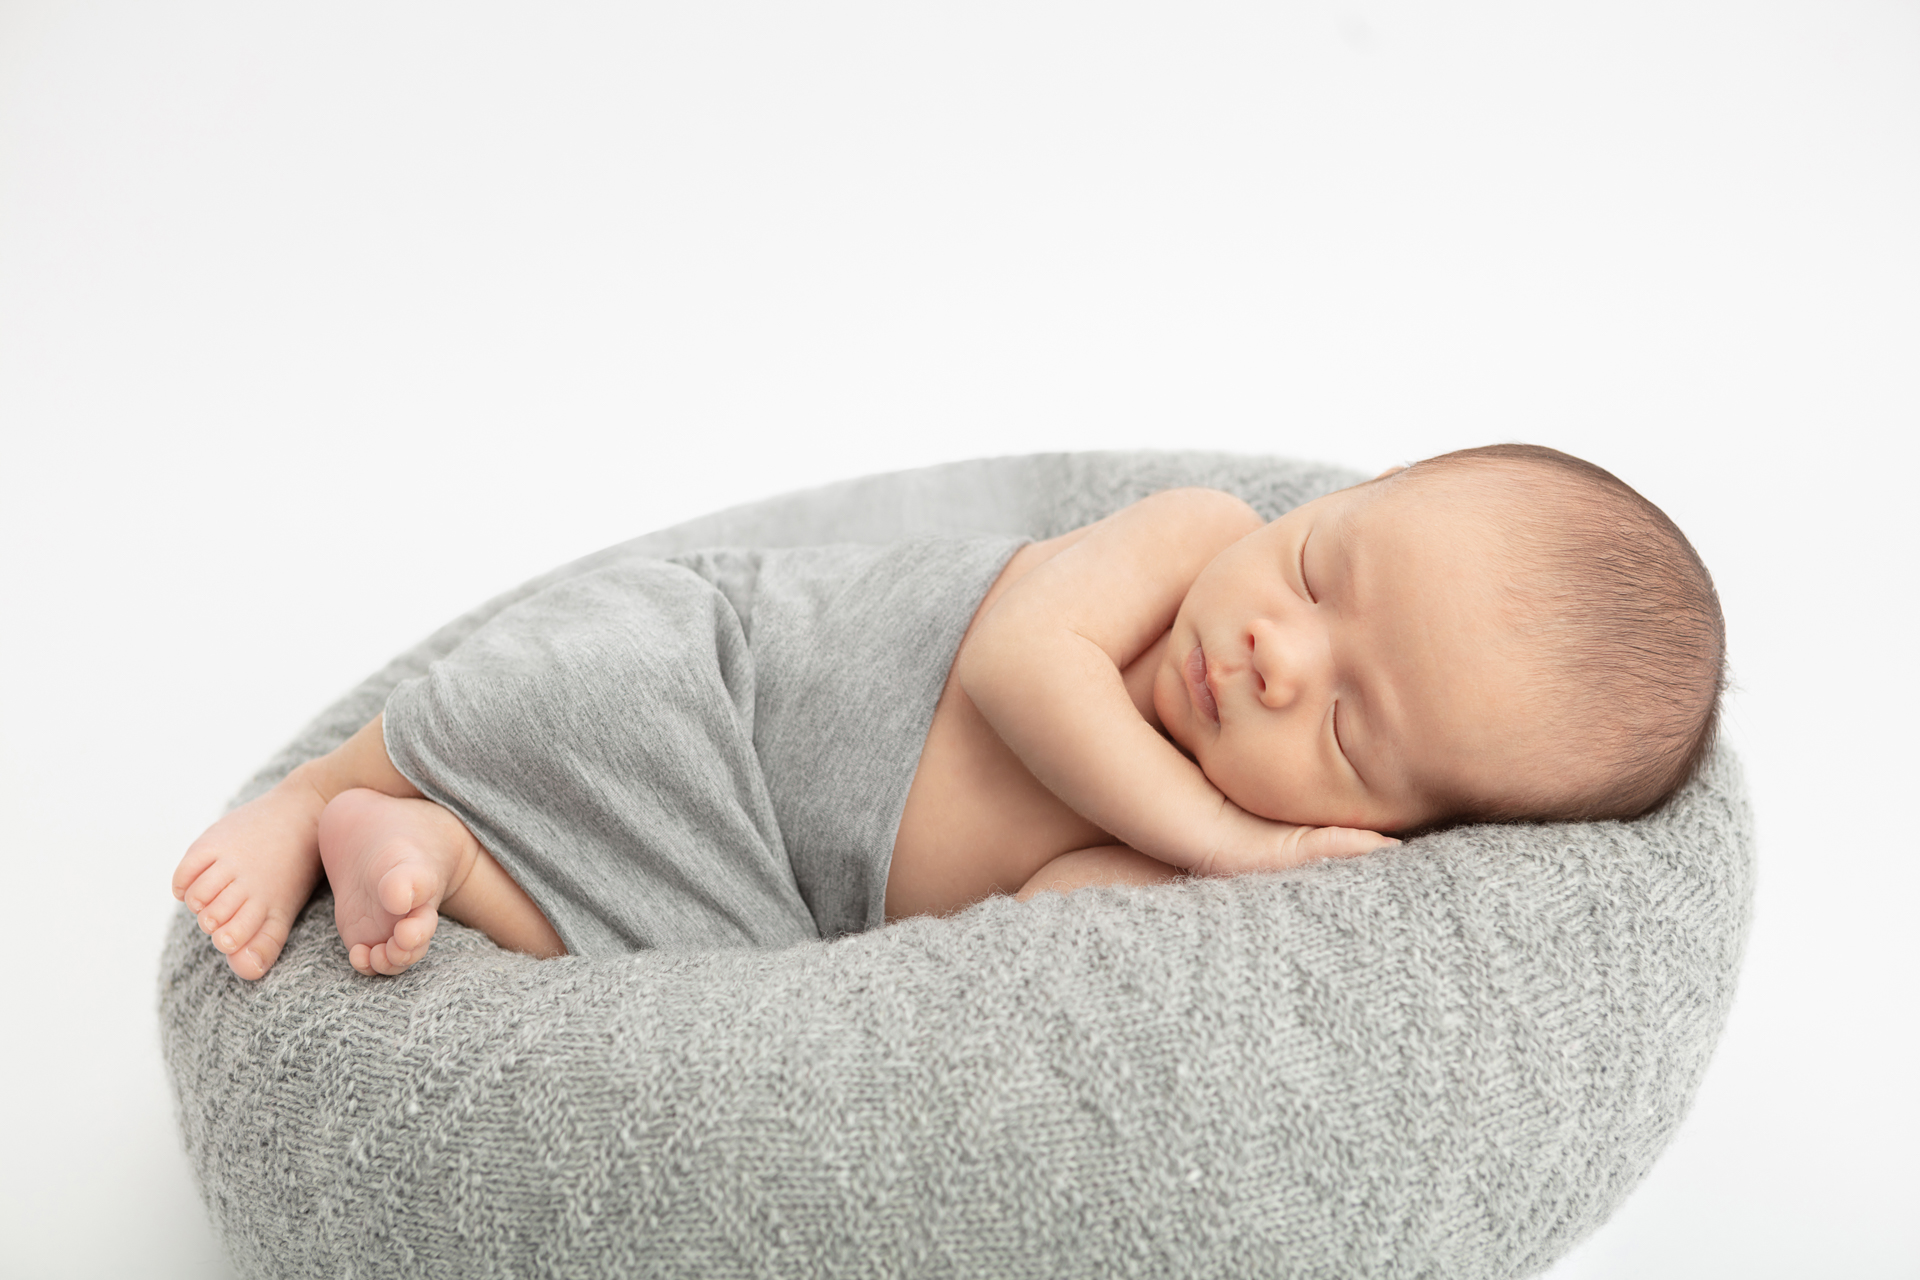 newborn baby boy wrapped in a gray heather swaddle and lying on a gray knit pouf